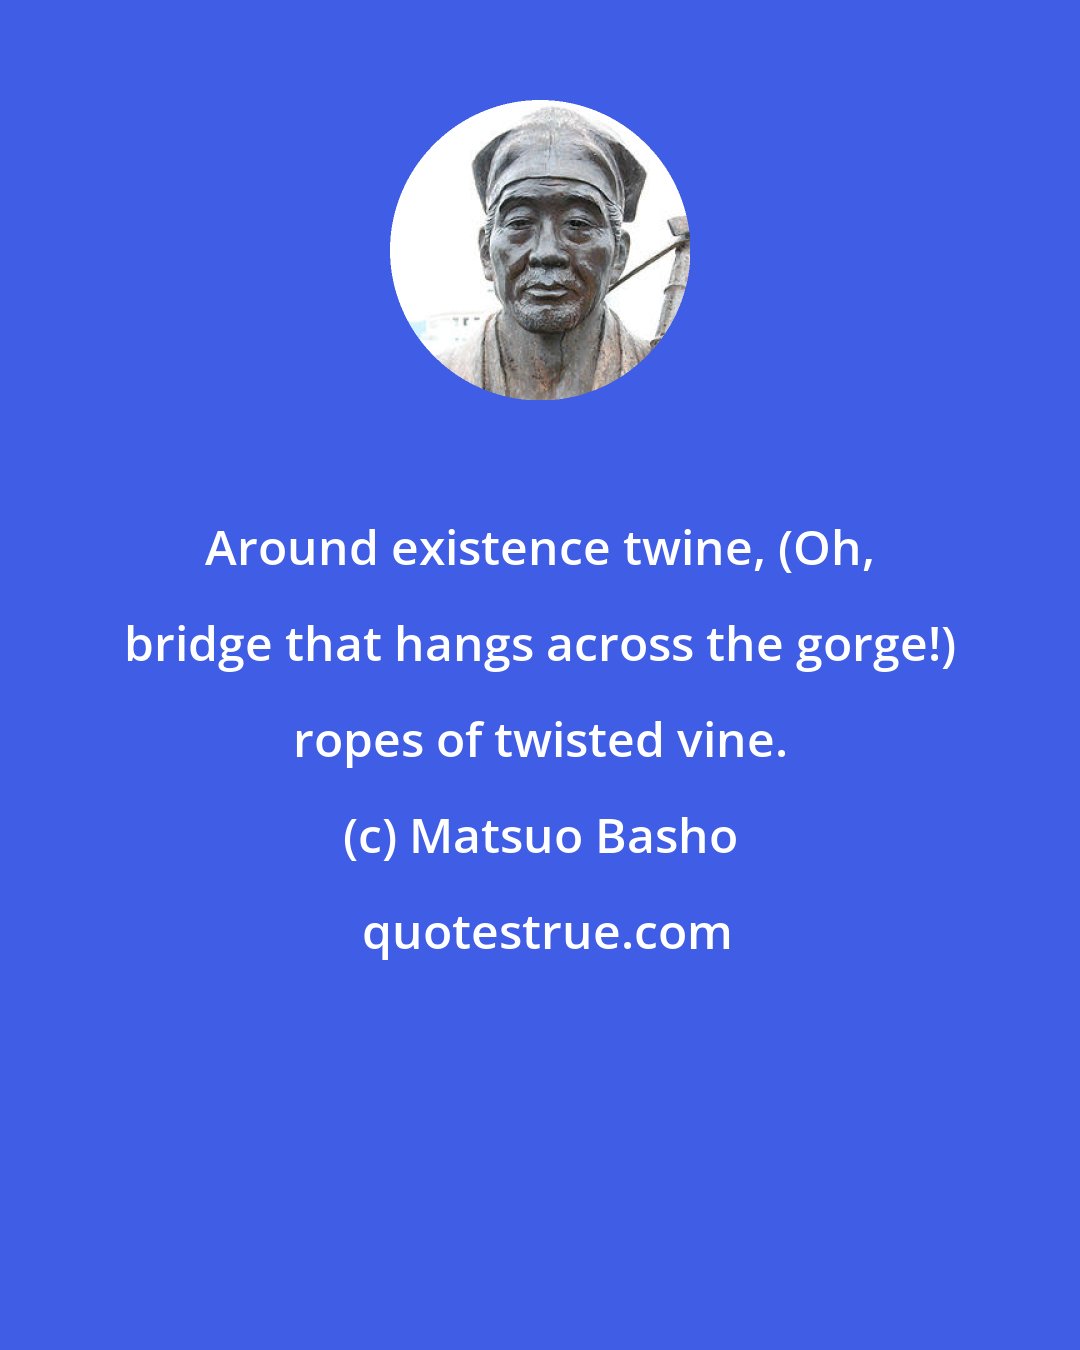 Matsuo Basho: Around existence twine, (Oh, bridge that hangs across the gorge!) ropes of twisted vine.